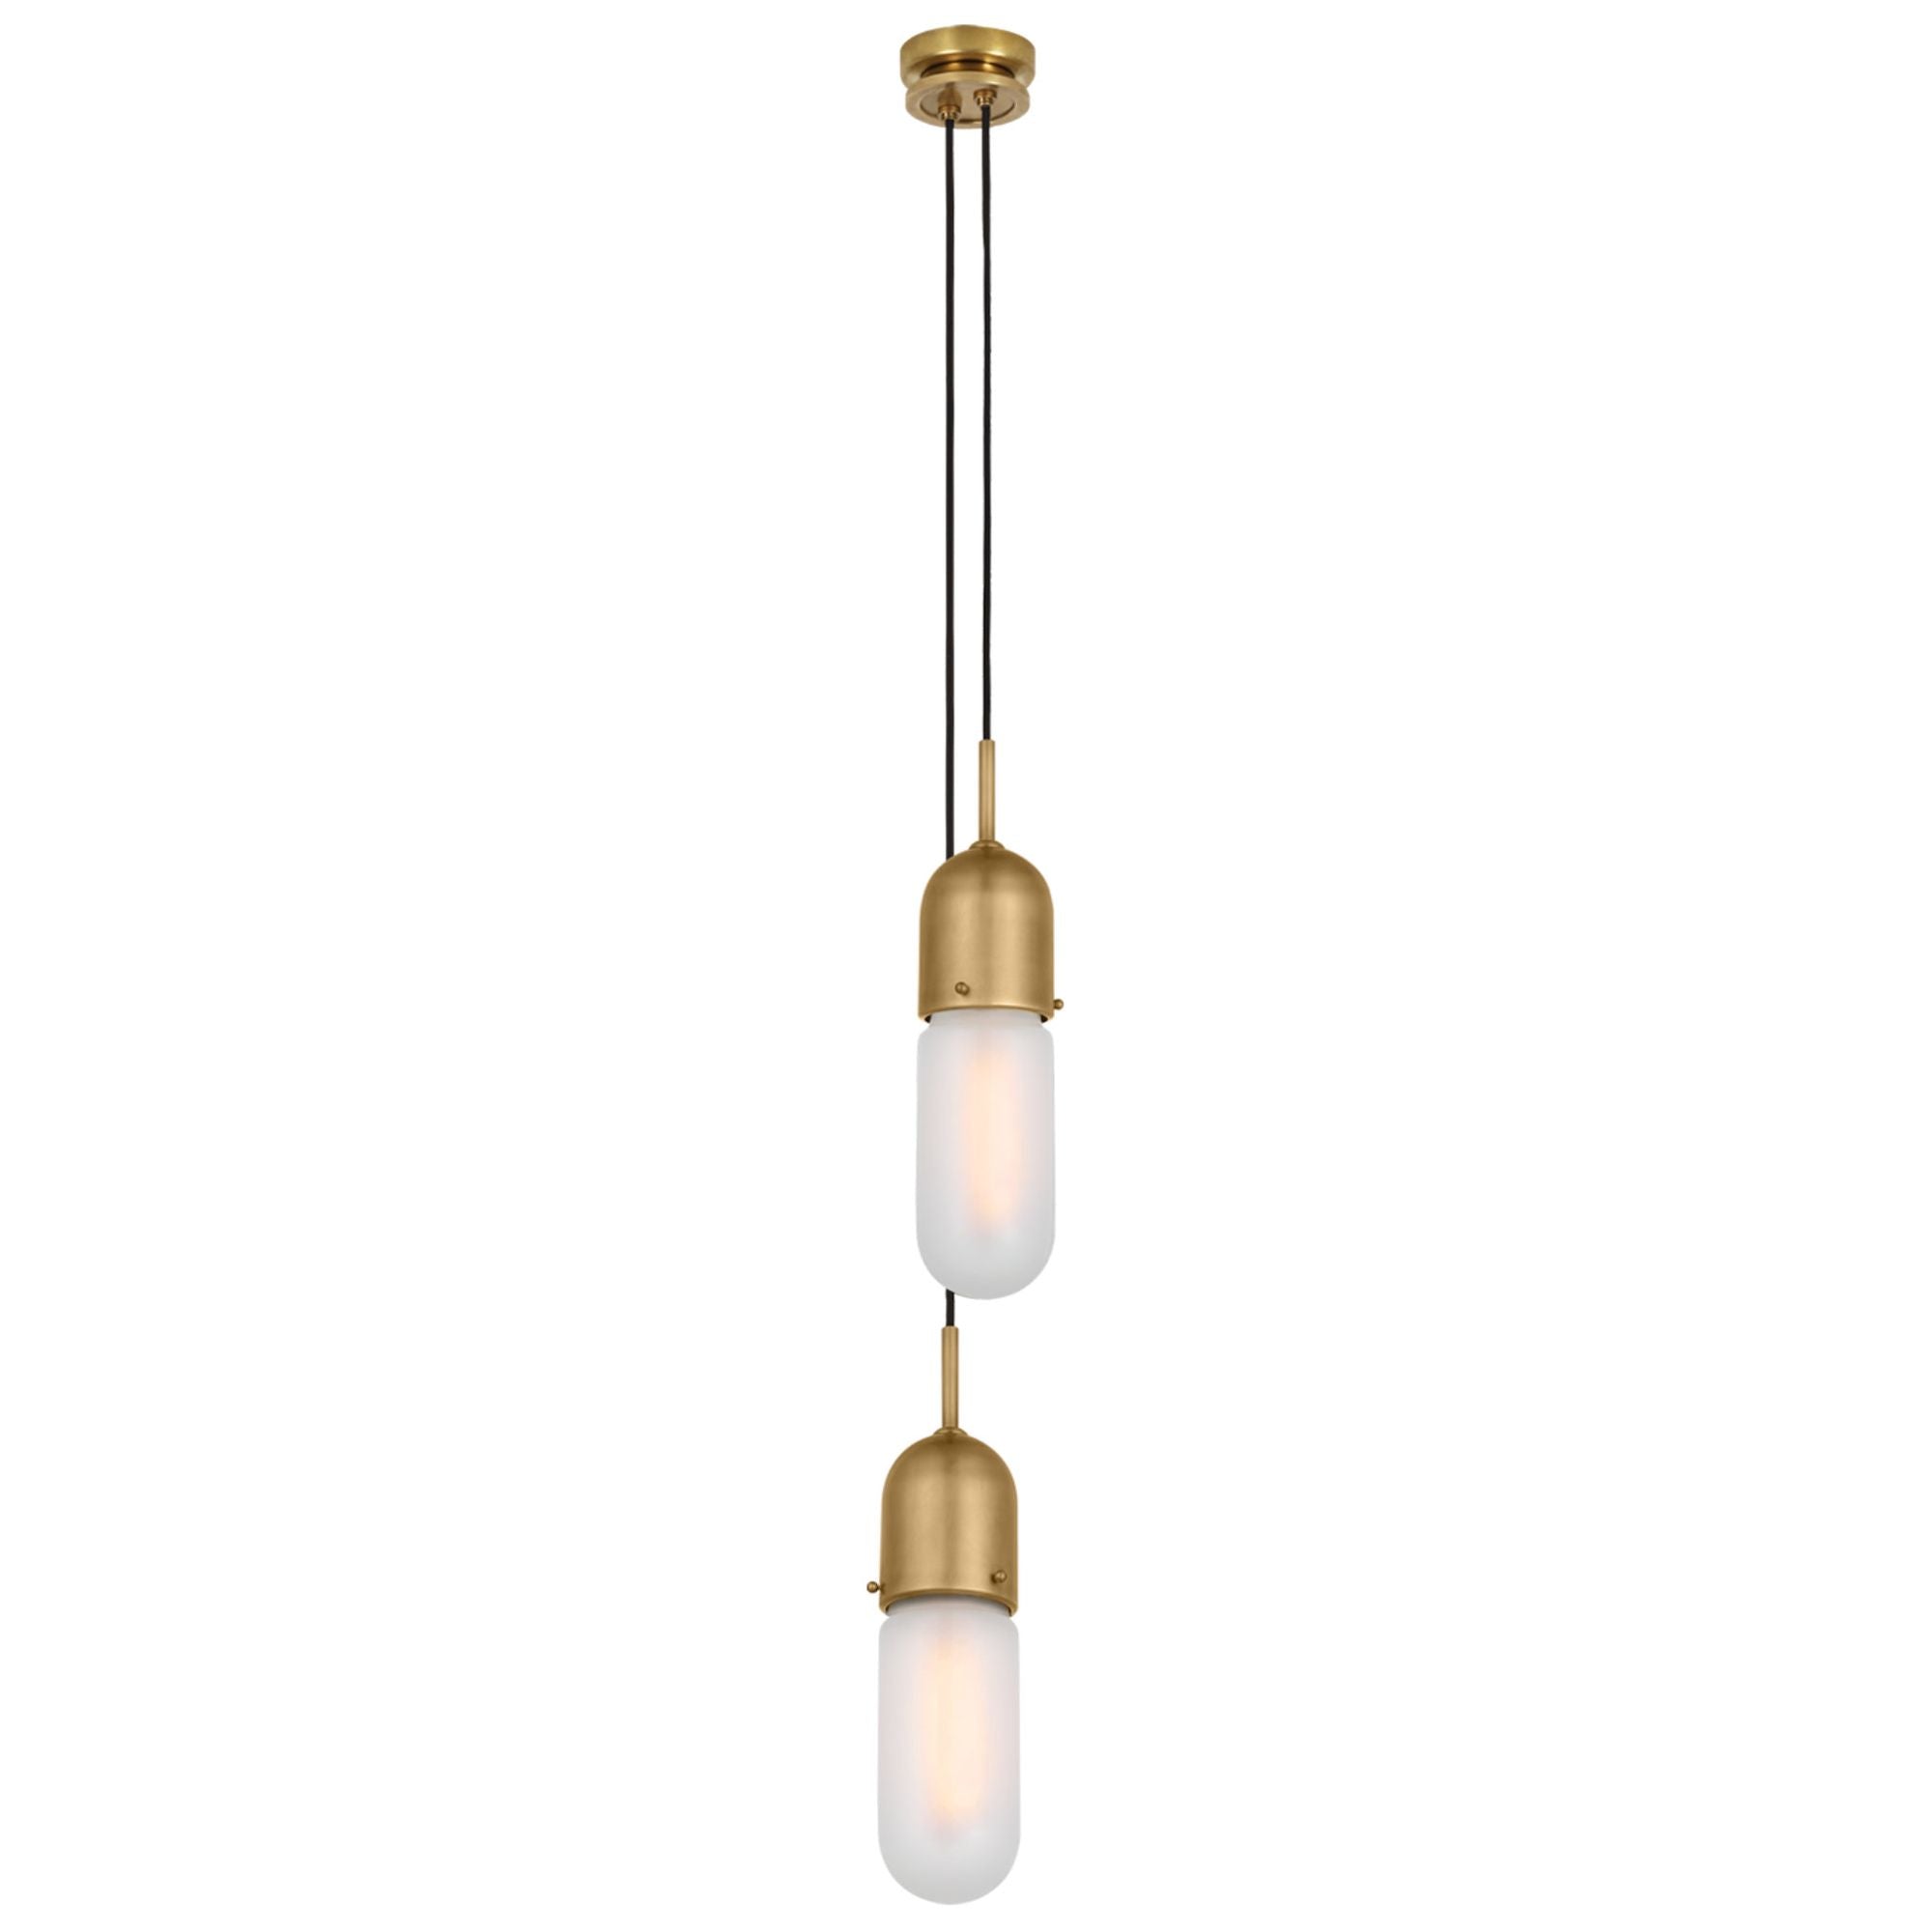 Thomas O'Brien Junio 2-Light Pendant in Hand-Rubbed Antique Brass with Frosted Glass